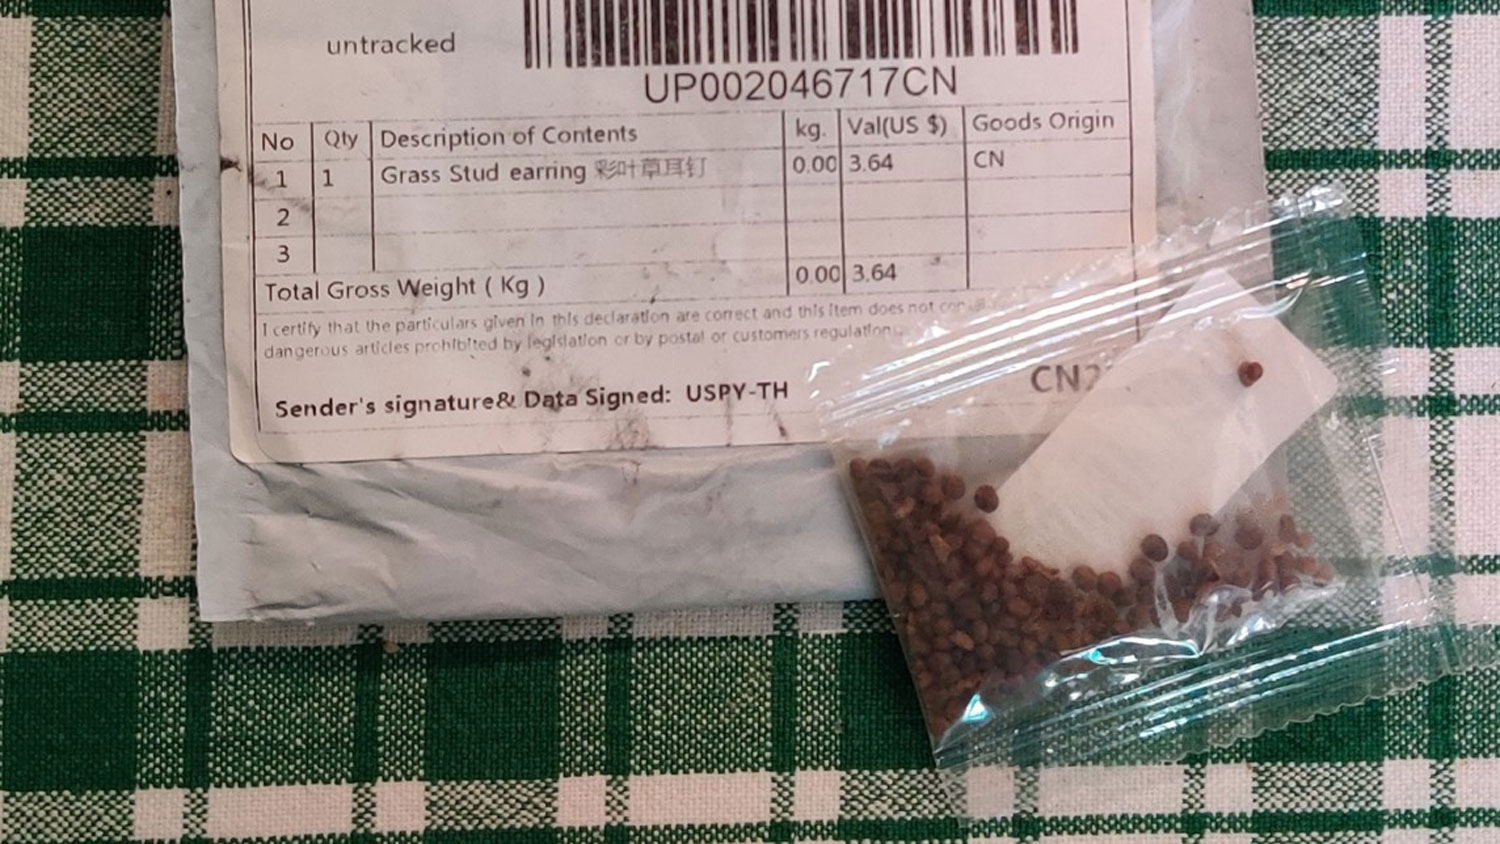 A package with seeds on top of the package